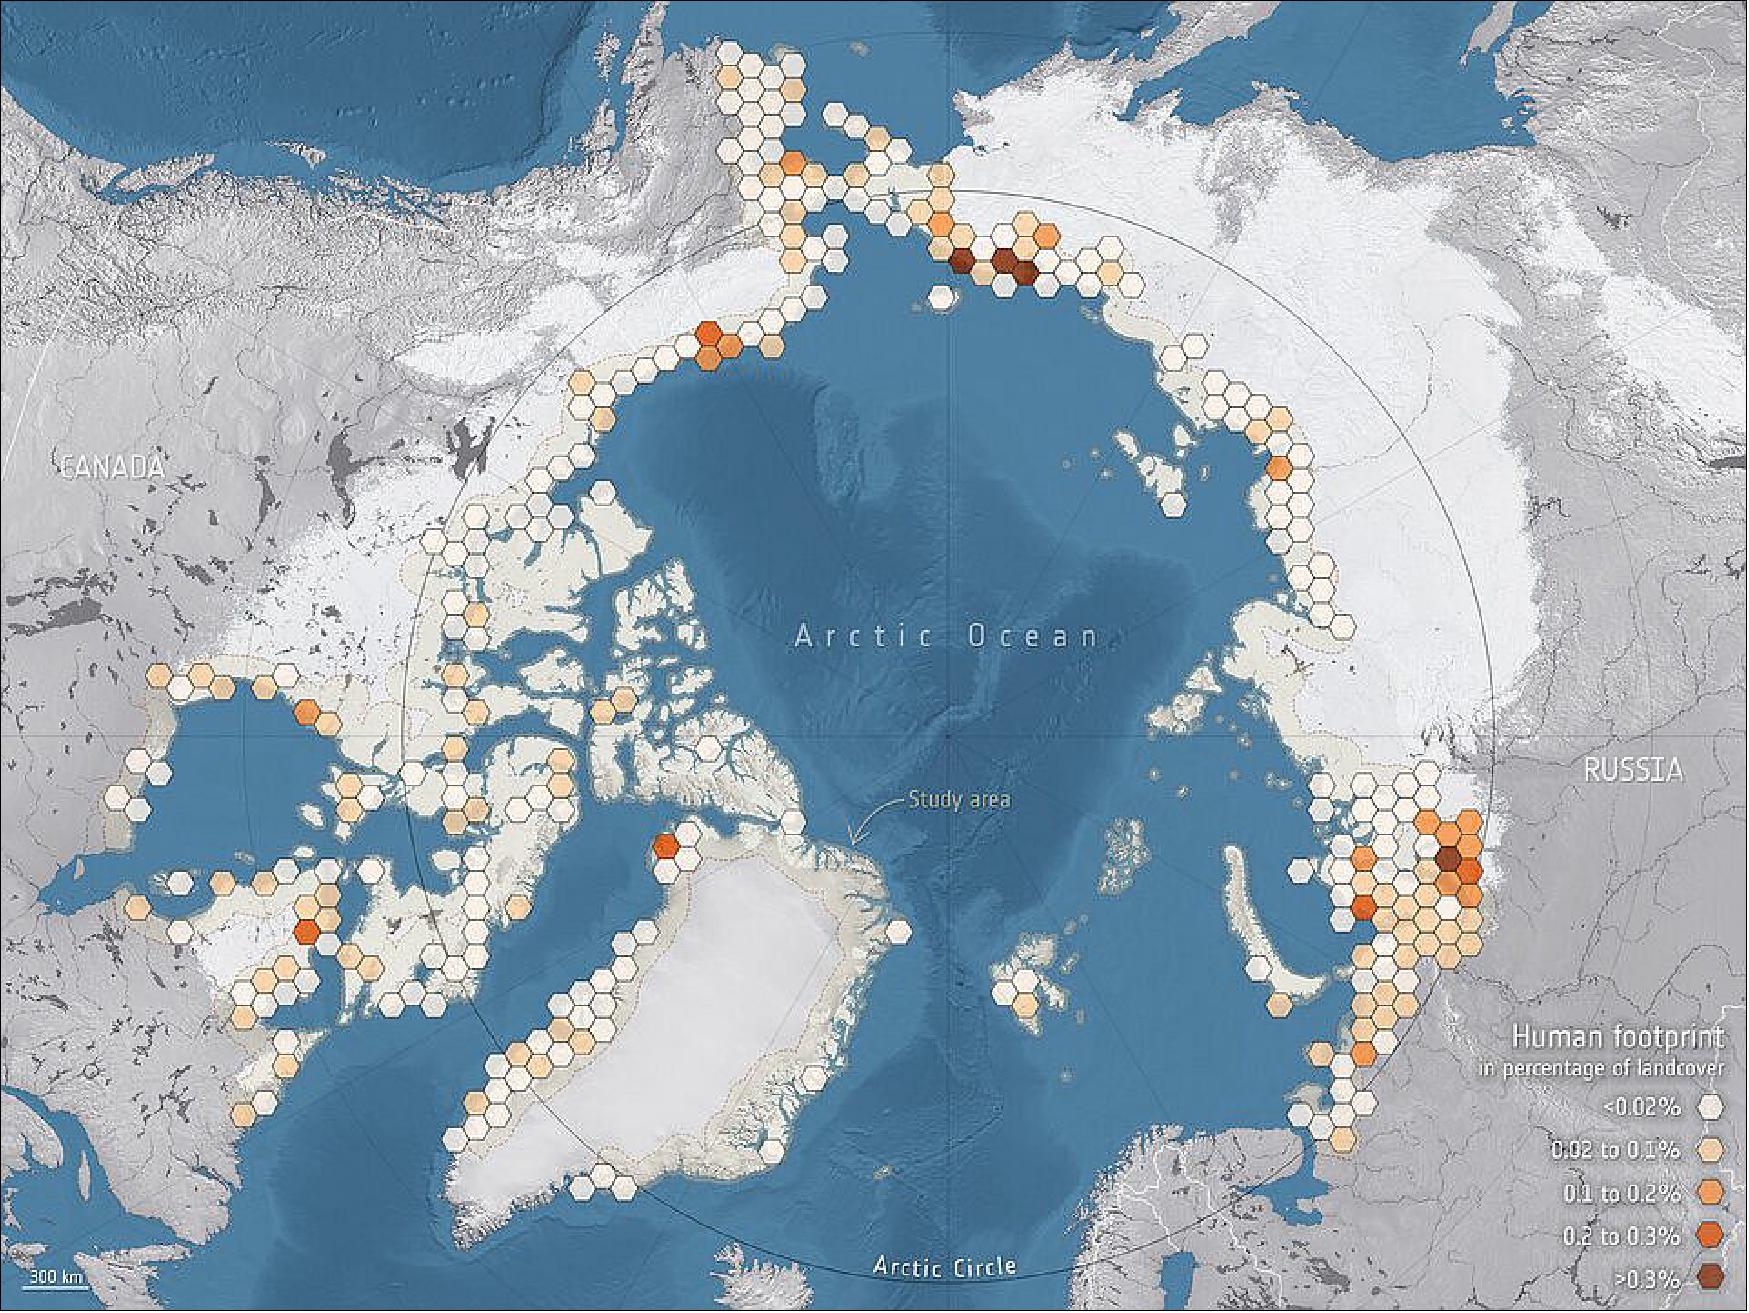 Figure 10: At risk of thawing permafrost. Research that uses data from the Copernicus Sentinel-1 and Sentinel-2 missions along with artificial intelligence offers a complete overview of the Arctic, identifying communities and infrastructure that will be at risk of permafrost thaw over the next 30 years. According to the new research, 55% of the area within 100 km of the Arctic coastline is expected to be affected 2050. The latest Climate Change Initiative Permafrost time series offers the first circumpolar information on the state of the permafrost and recent changes at a scale of 1 km. It allows for a circumpolar assessment of regions that are prone to change and the research points to regions where more detailed monitoring is needed to capture impacts at local levels (image credit: Bartsch et al. (2021), permafrost in background (light grey area) – year 2019 ground temperature at 2 m depth of Obu et al. (2021), Permafrost CCI/ESA)